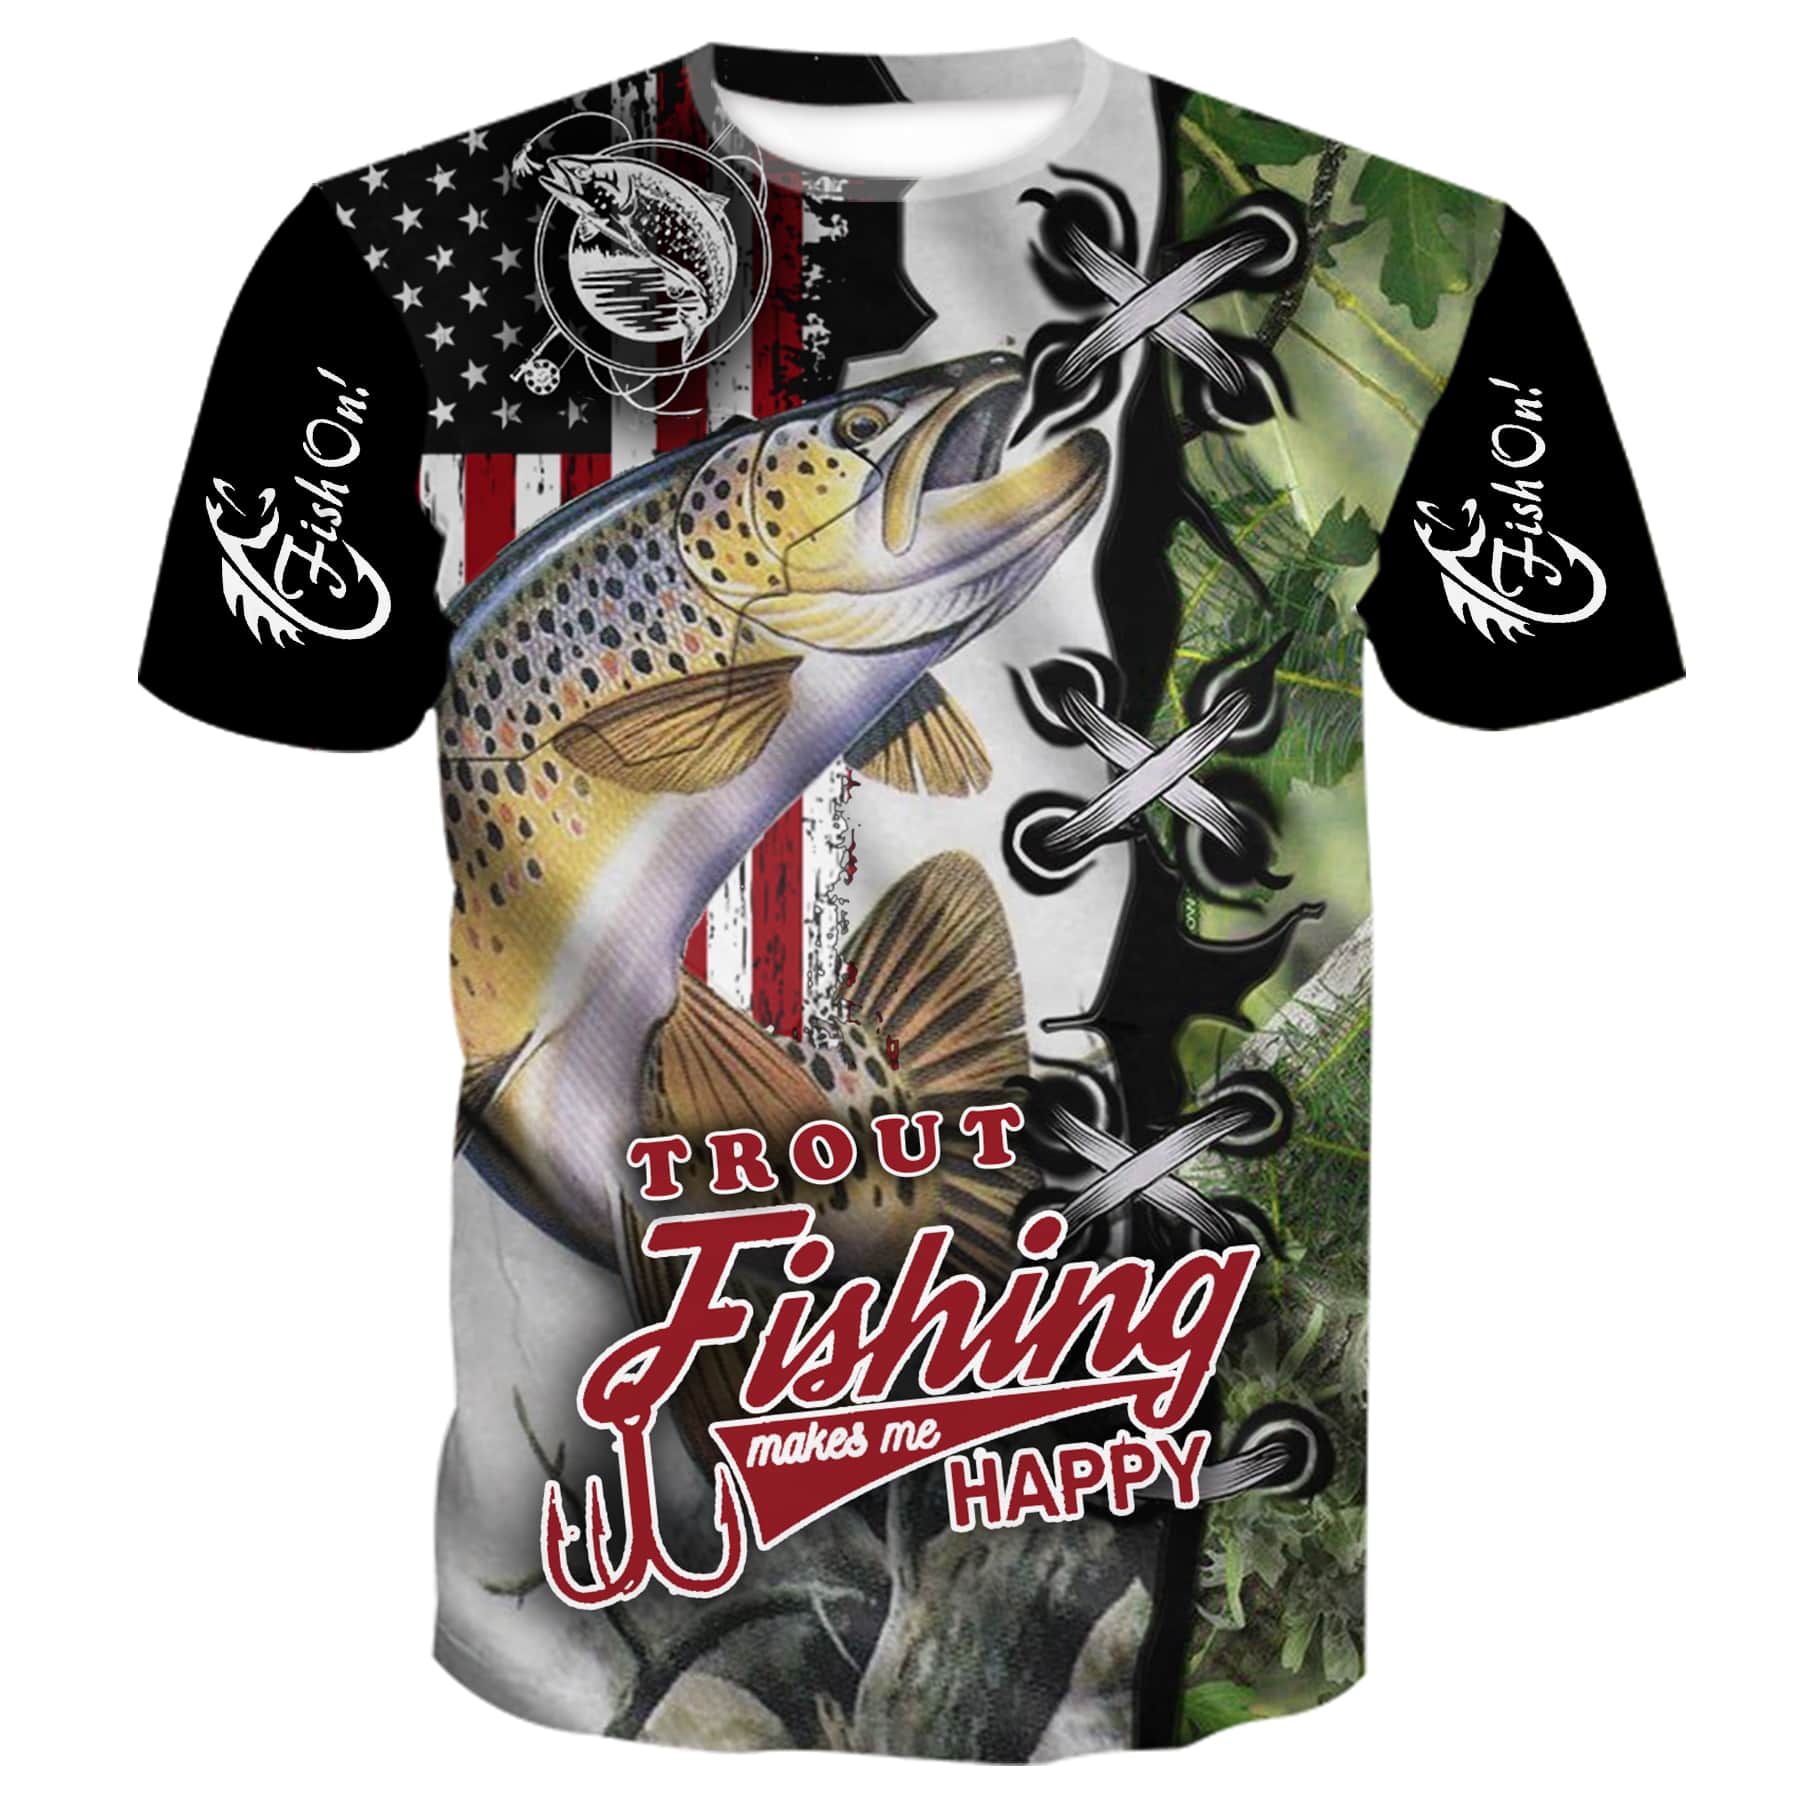 Trout Fishing makes me happy - T-Shirt